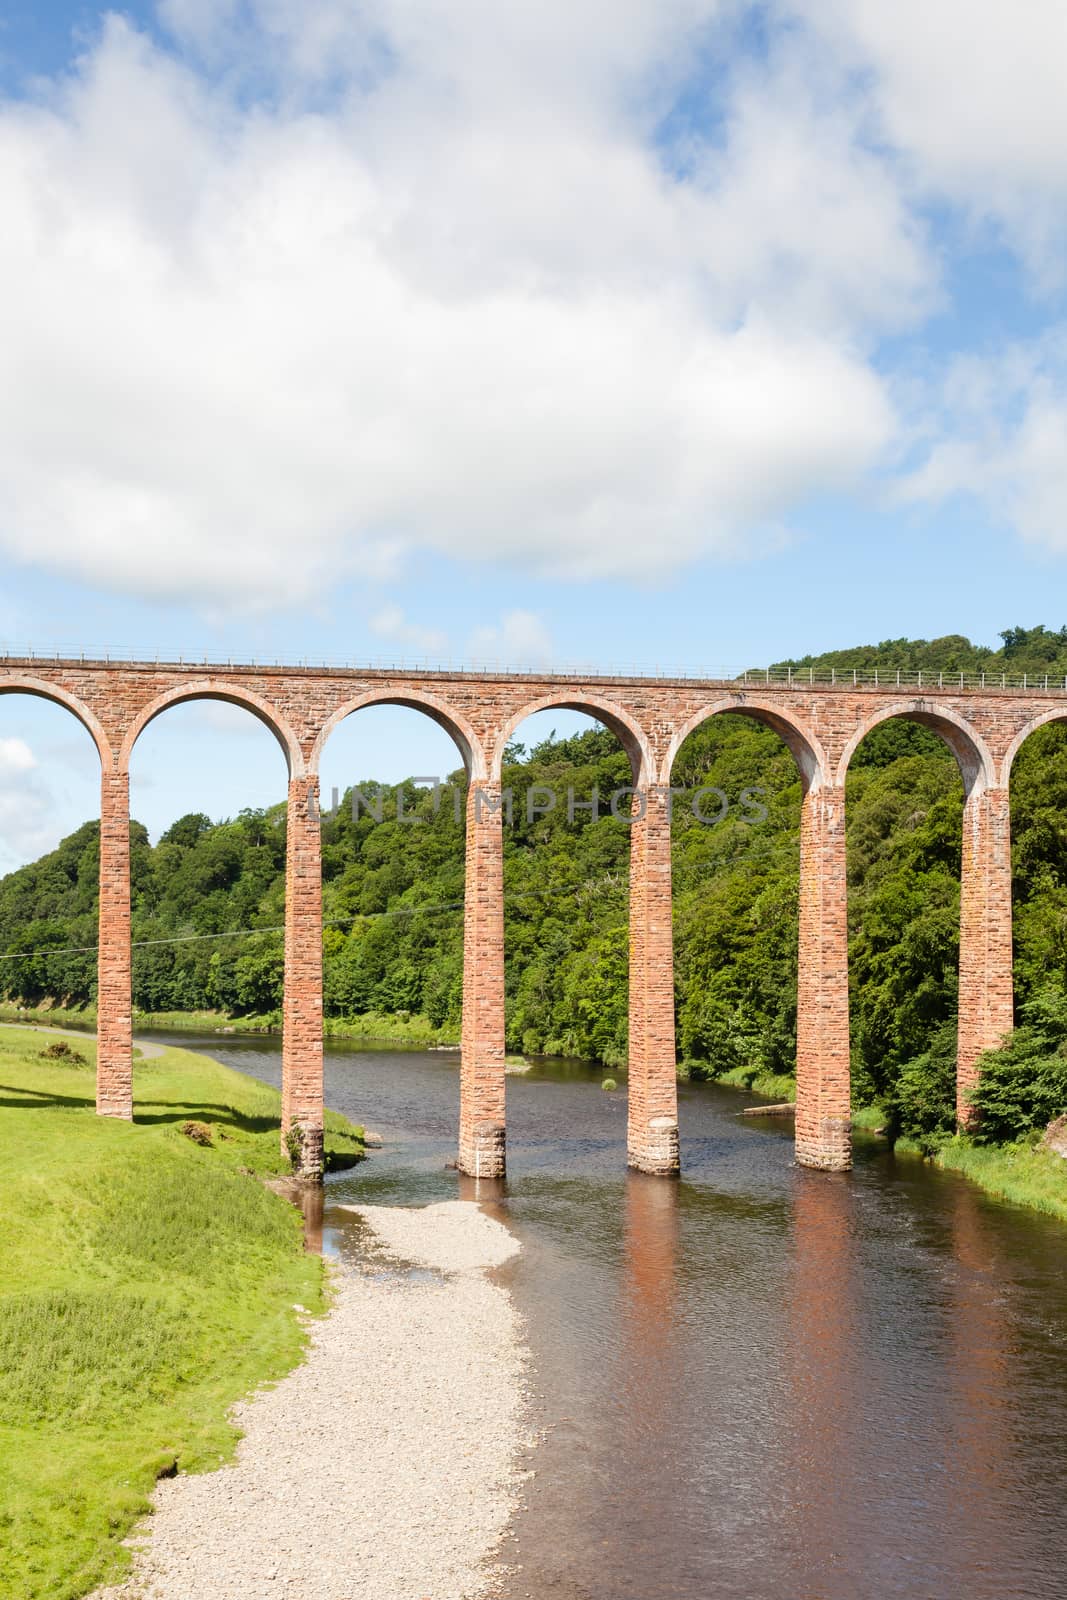 Leaderfoot Viaduct by ATGImages